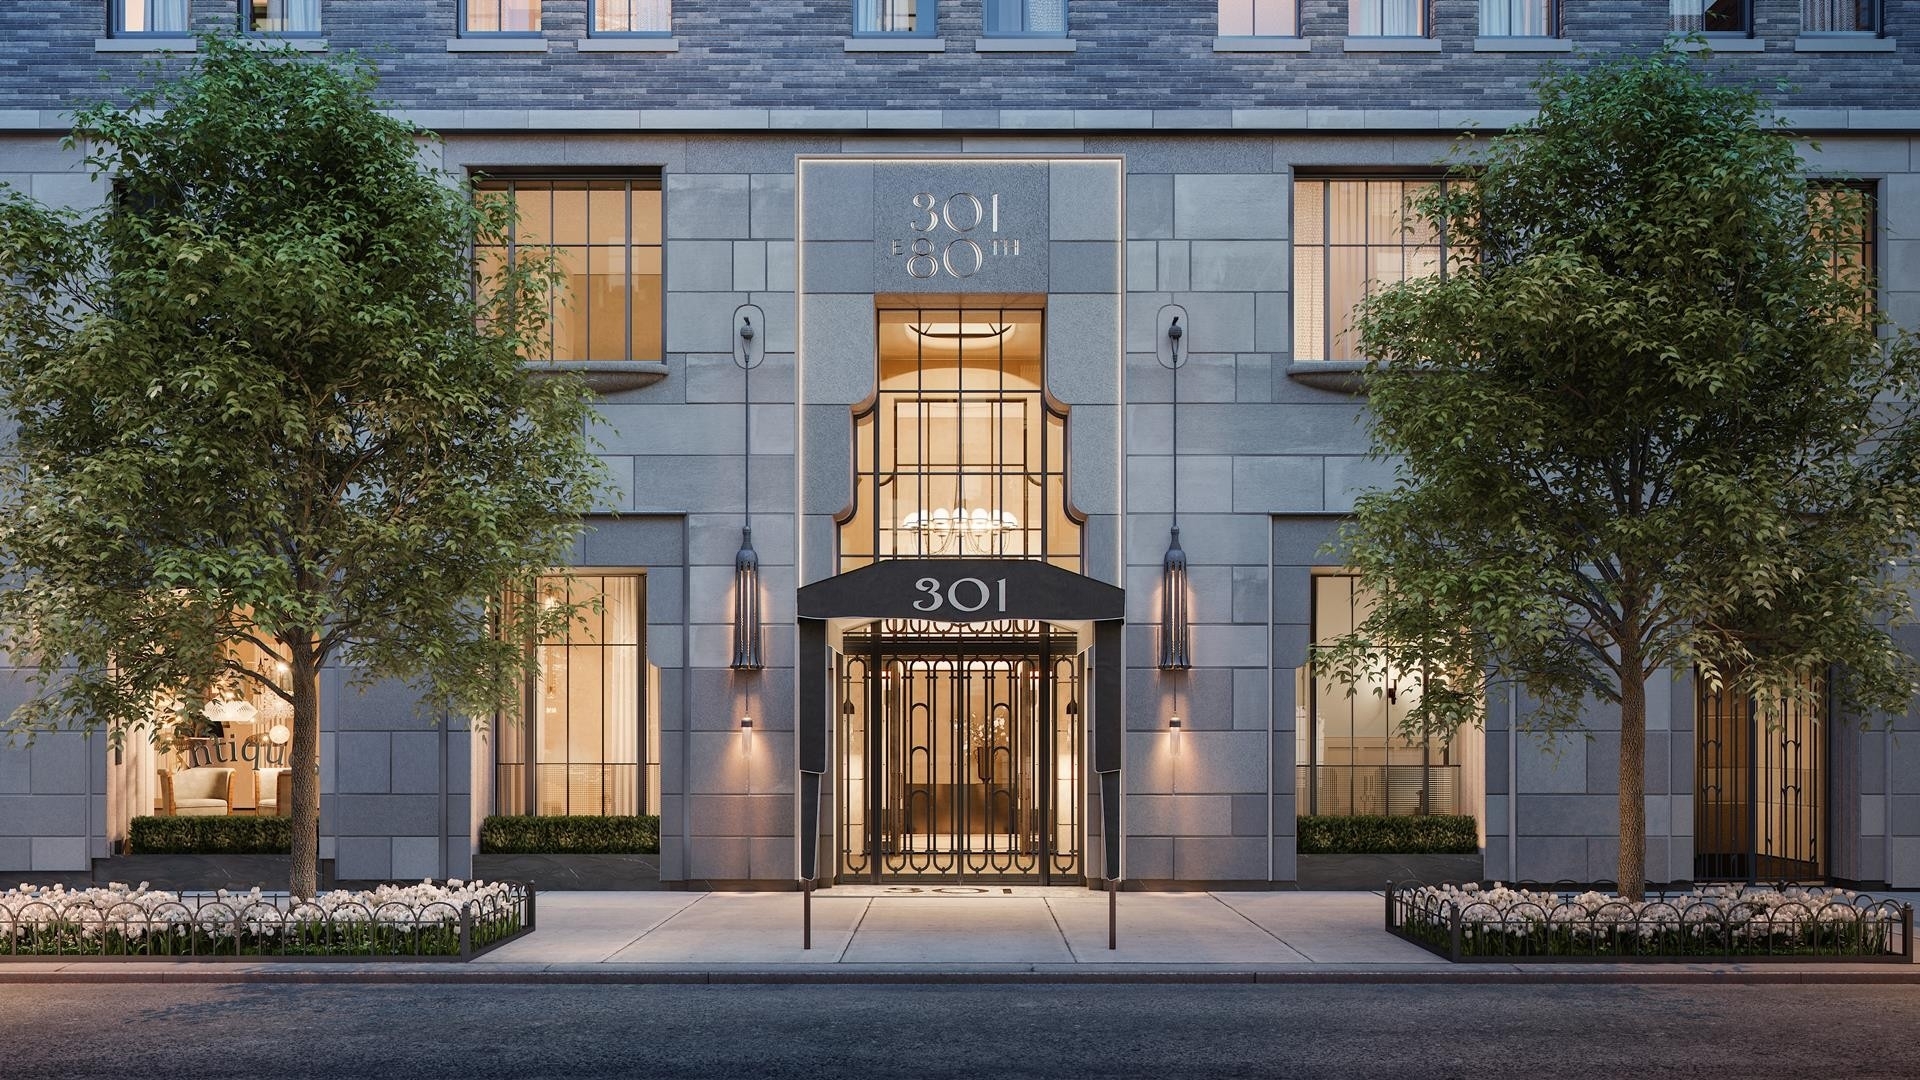 2. Condominiums for Sale at Beckford Tower, 301 E 80TH ST, 4B Yorkville, New York, New York 10028